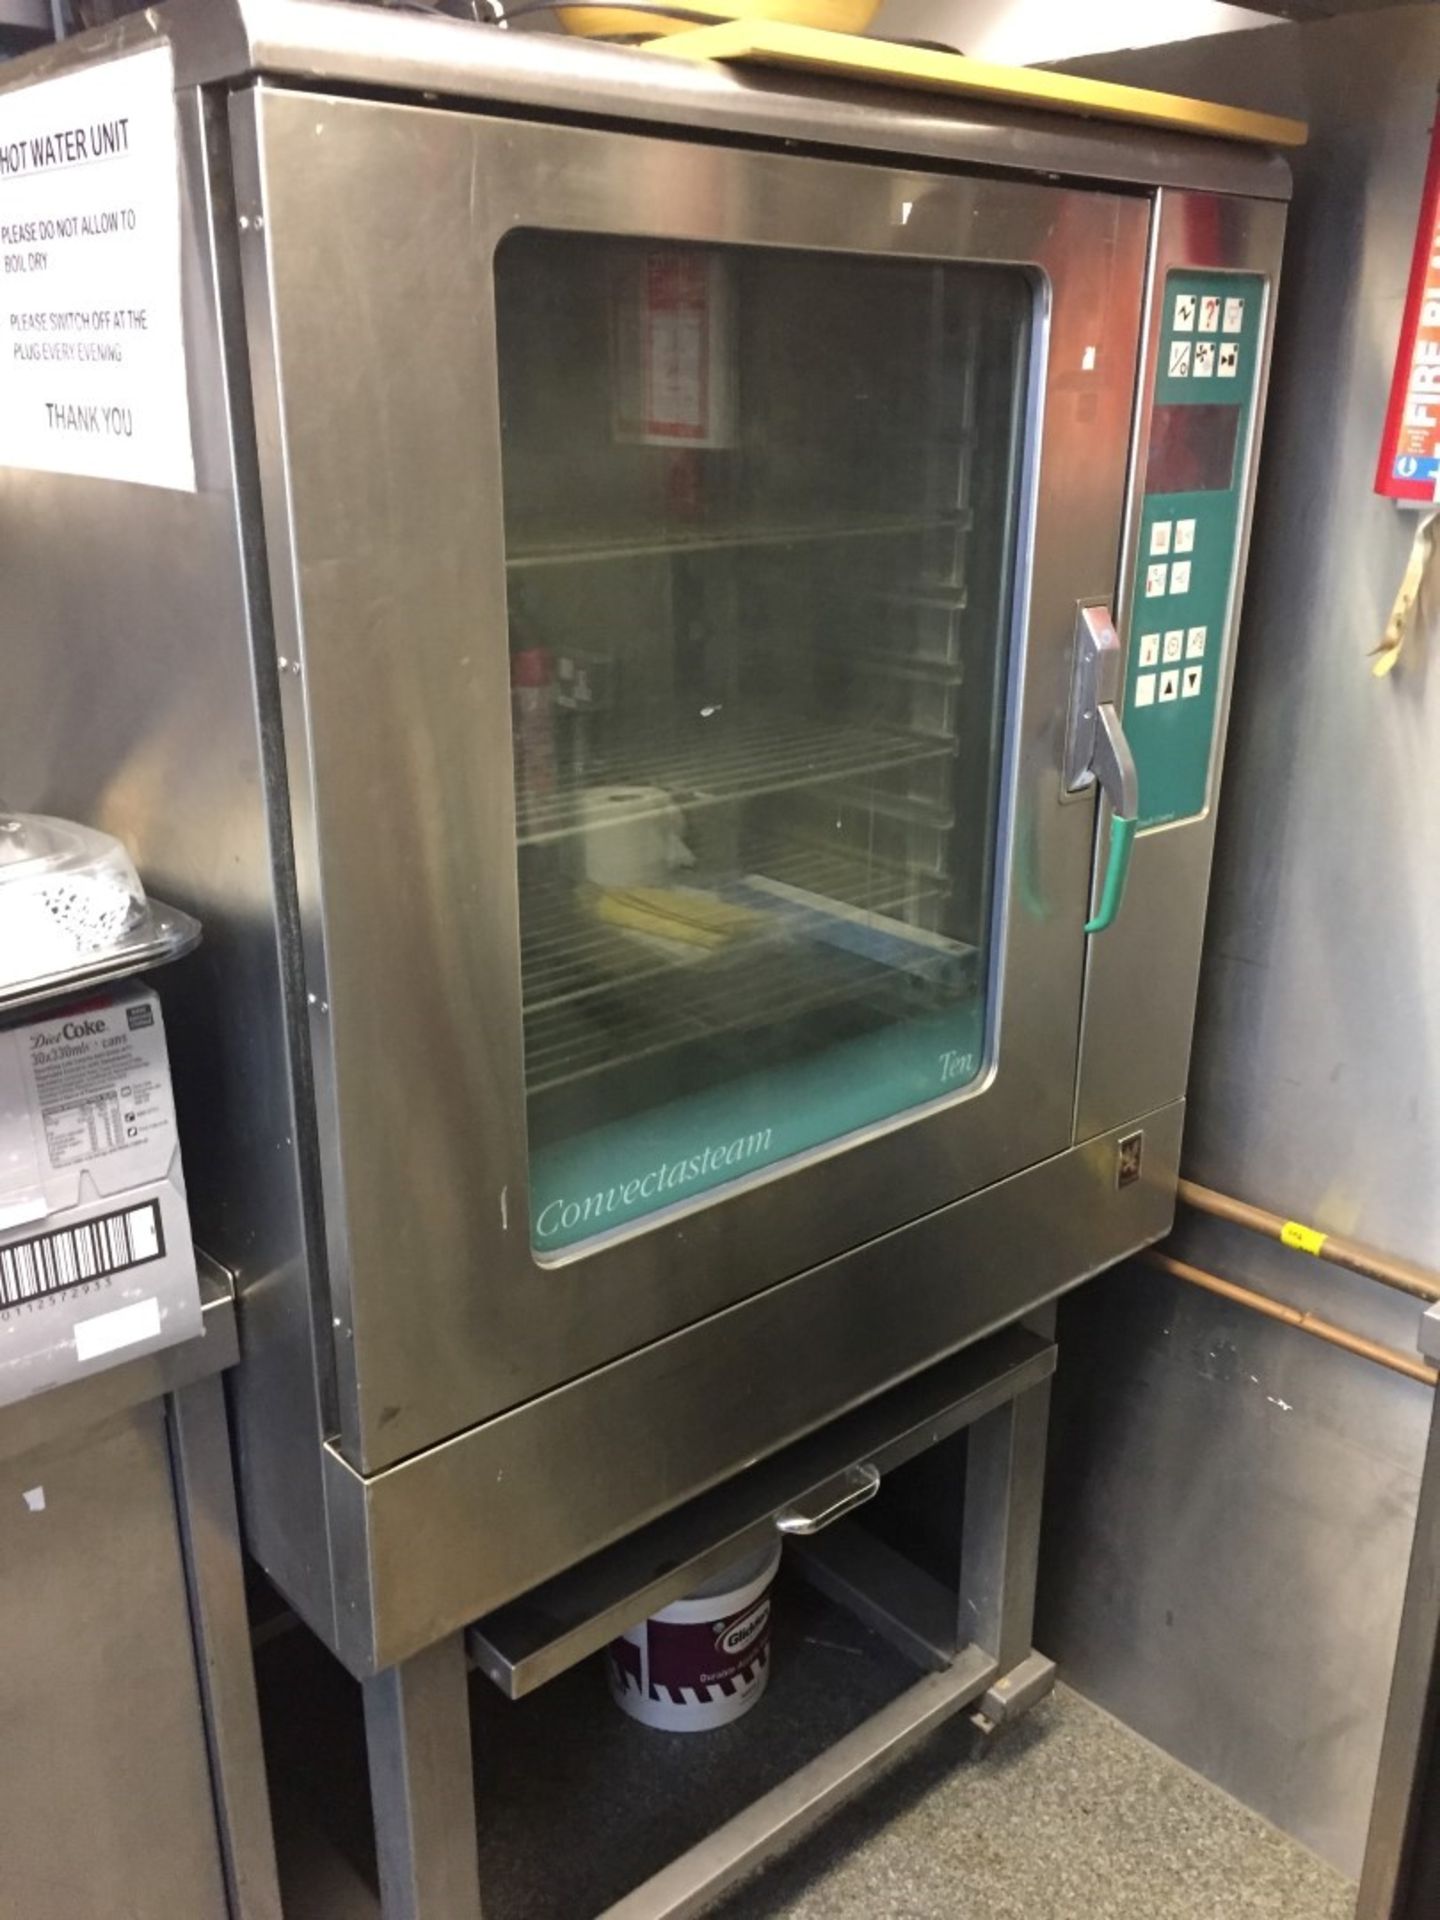 1 x Falcon CONVECTASTEAM-10 Commercial Convection Oven With Stand (Model: E4103TC) - Phase 3 -